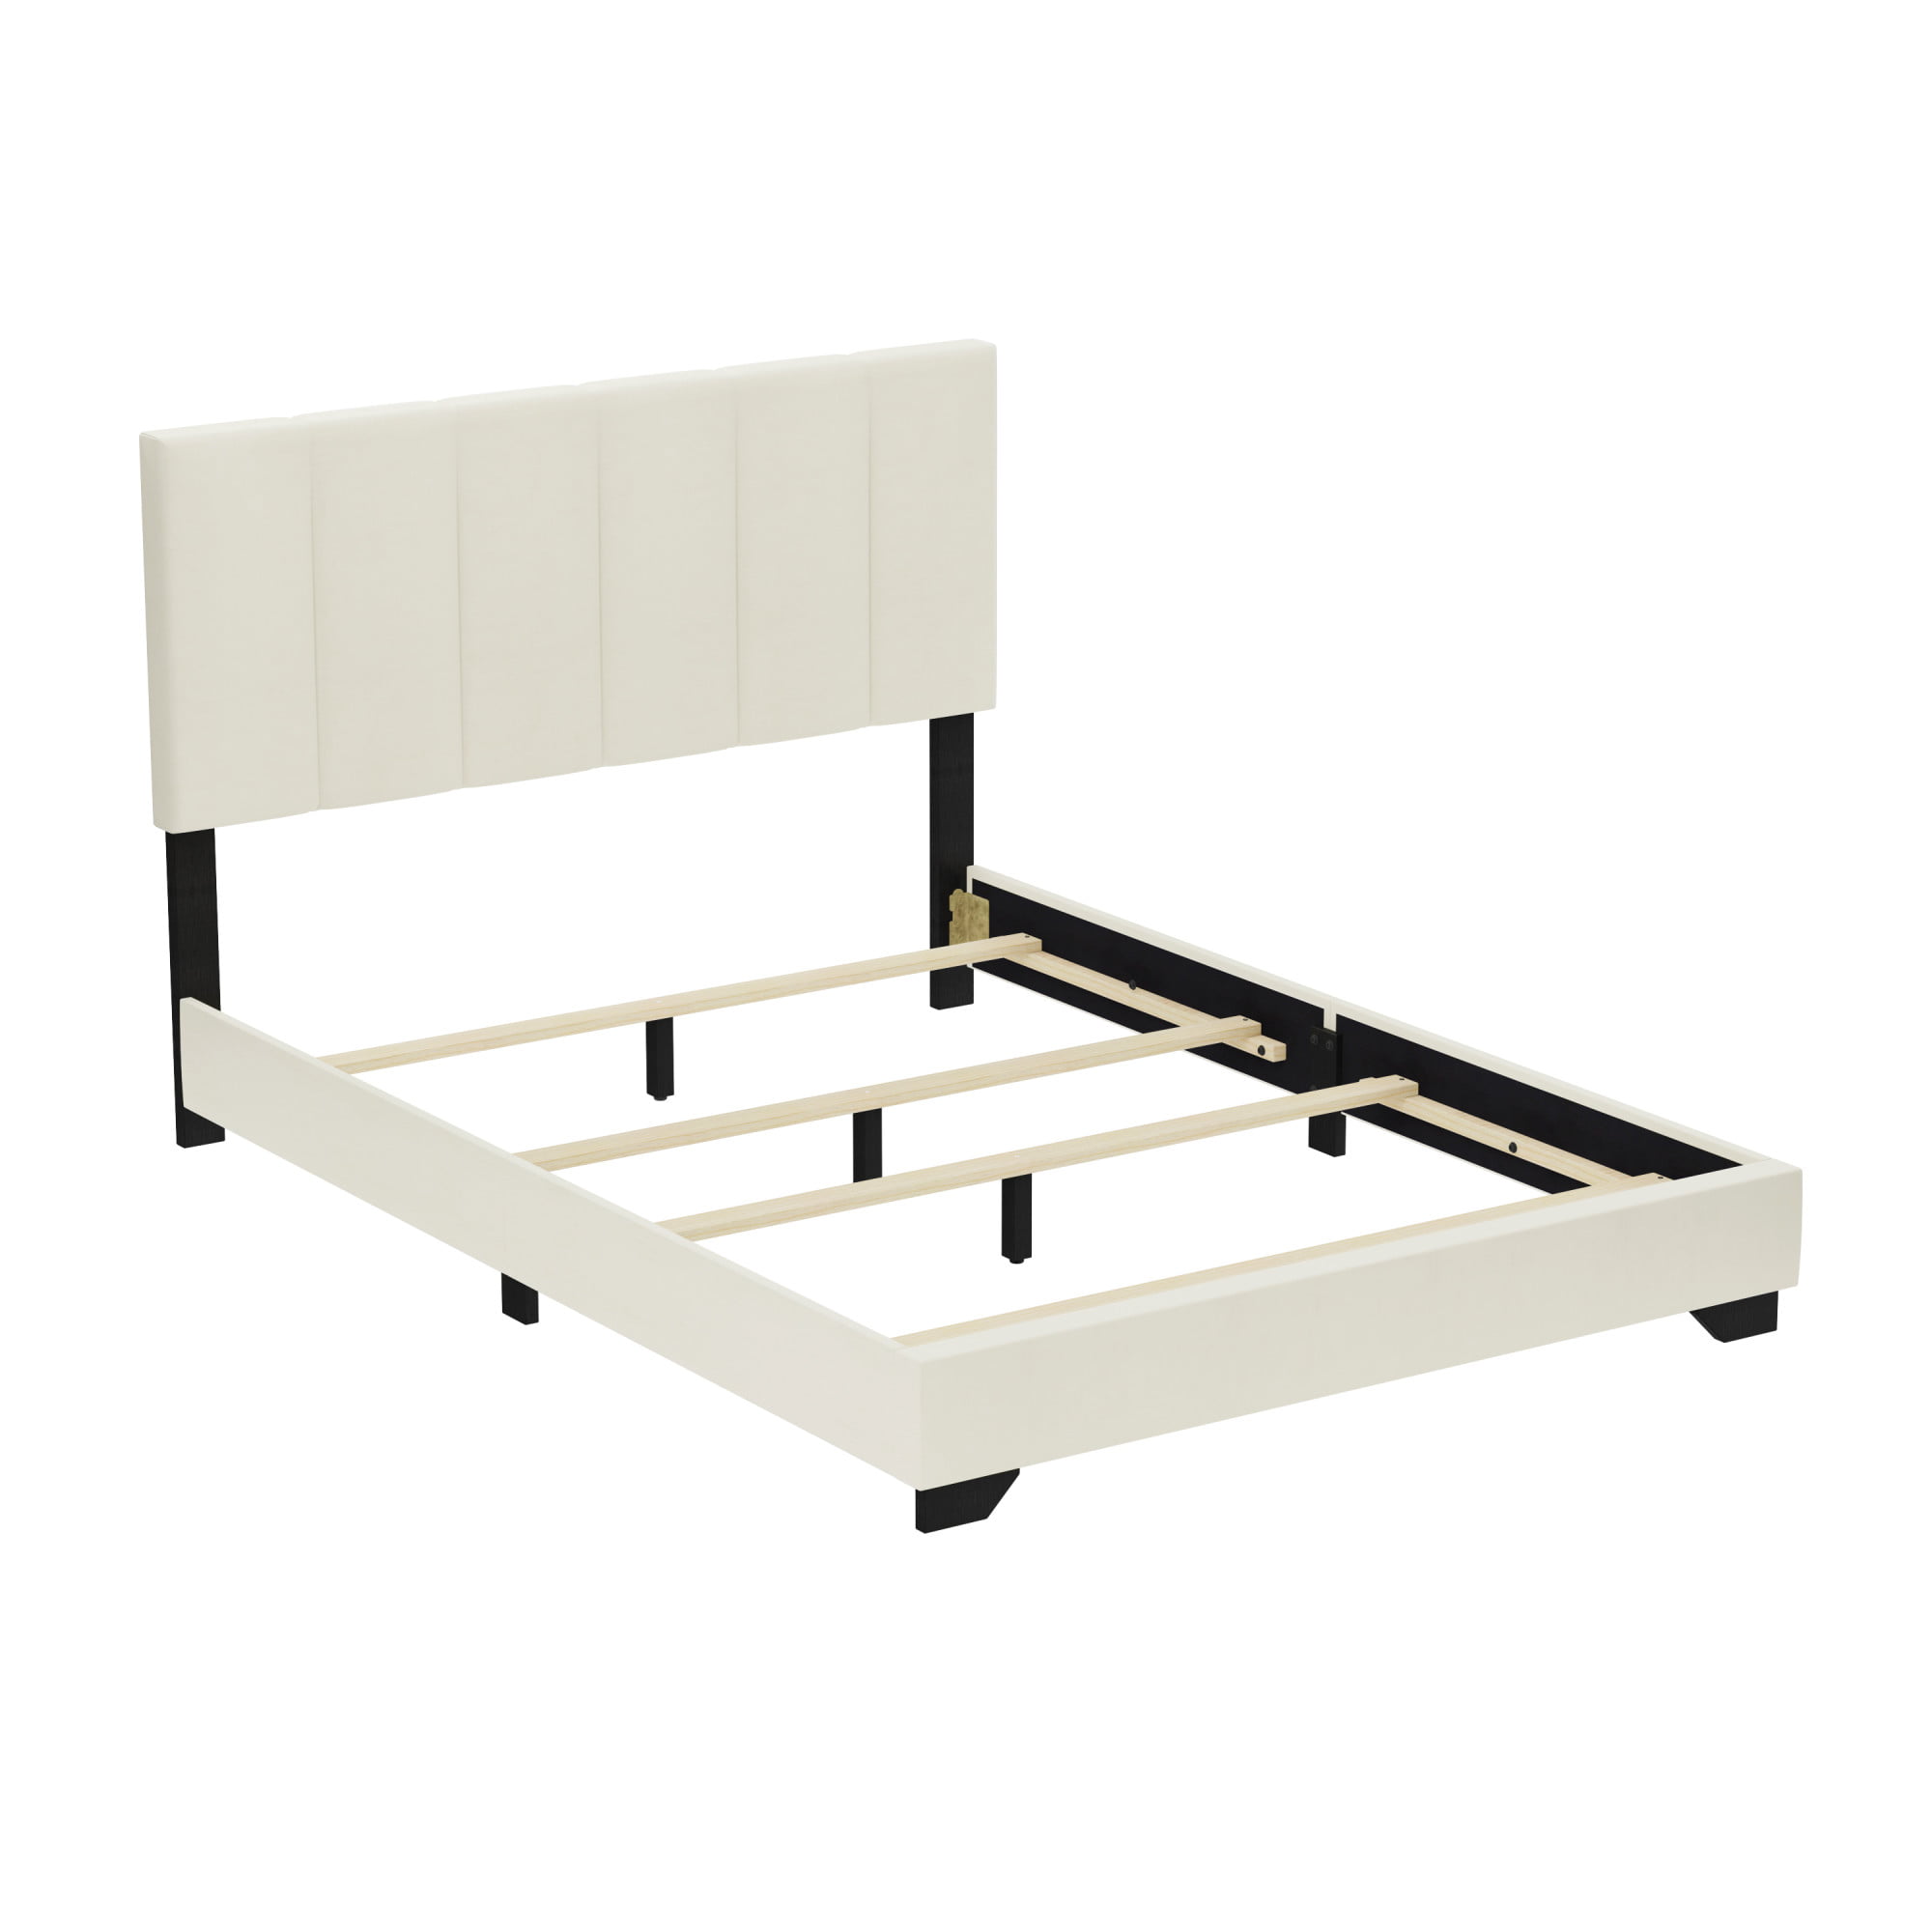 Hillsdale Reece Channel Stitched Upholstered Bed Frame: Full $115, Queen $125, King $139 (Various Colors) + Free Shipping